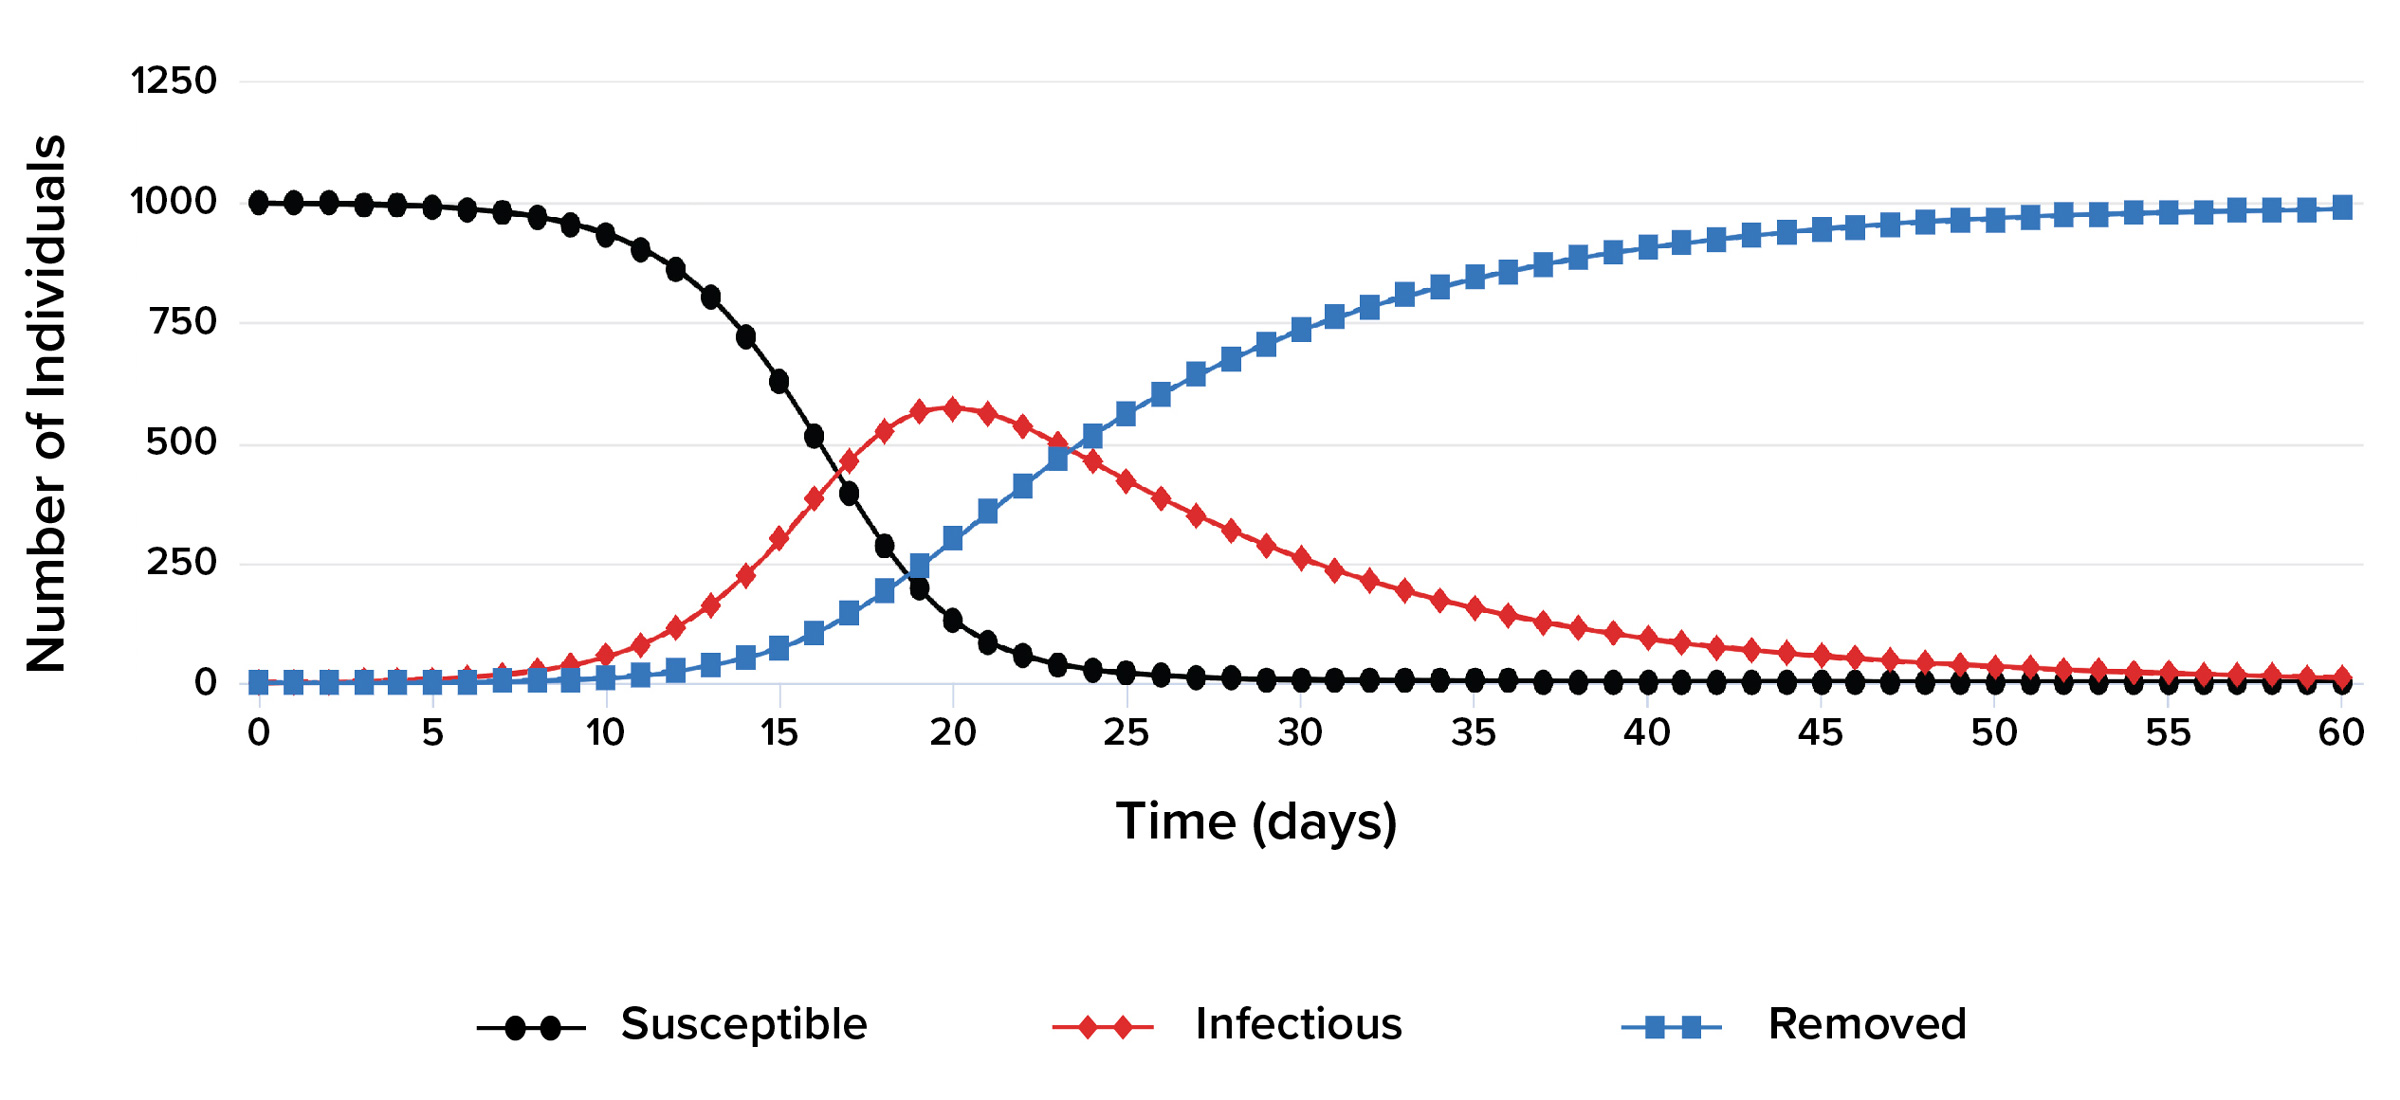 An example S-I-R graph. The x-axis measures Time in days and the y-axis measures number of individuals. A legend indicates that a black curve with circles graphs Susceptible individuals, a red curve with diamonds graphs Infectious individuals, and a blue curve with squares graphs Removed individuals.